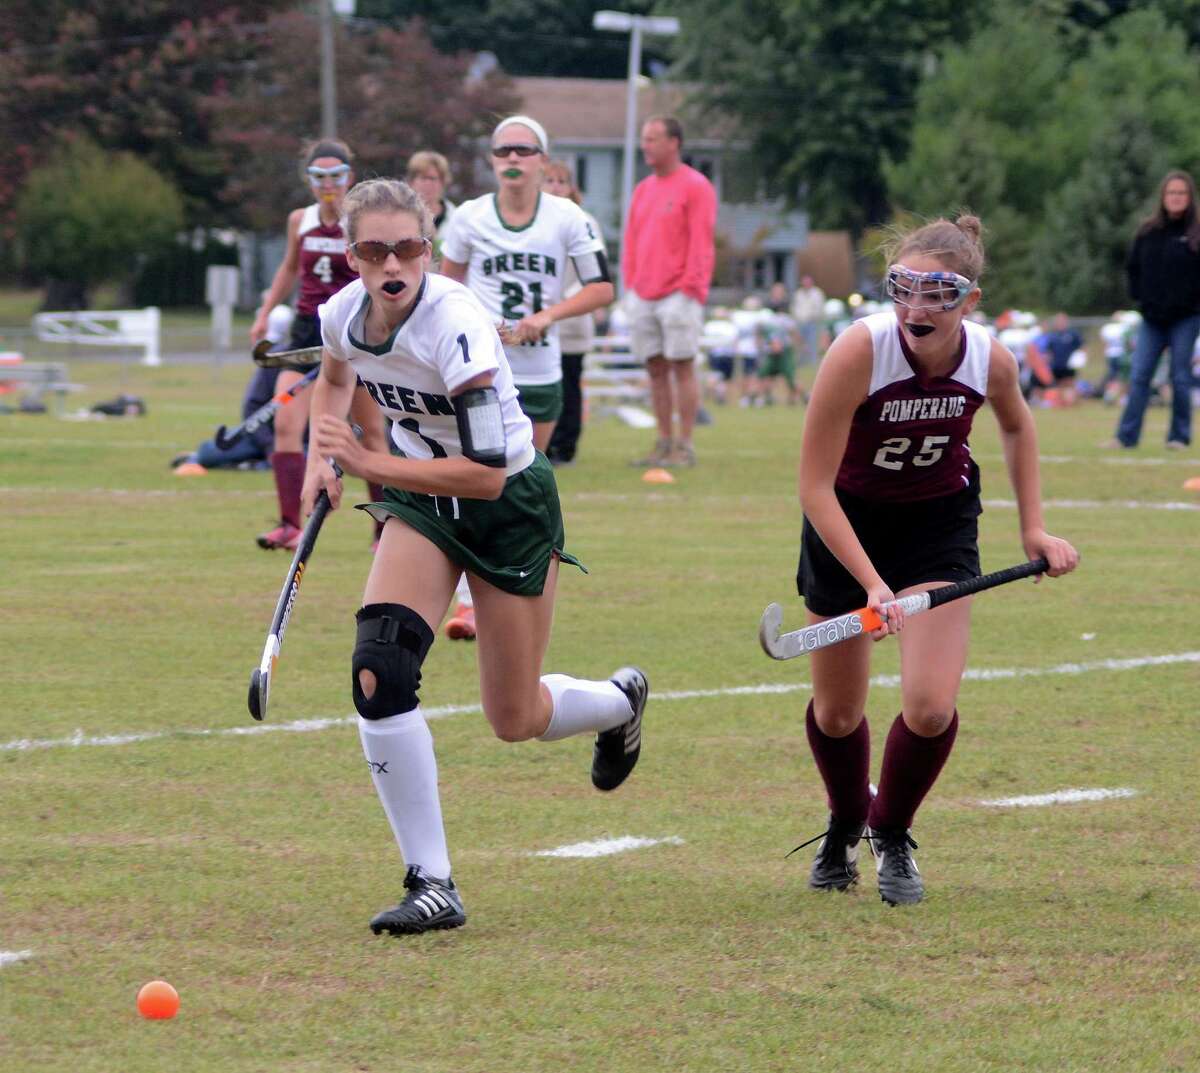 New Milfords Micheala Ferlow, left, and Pomperaugs Allison McCormick rush to gain possession during a game at New Milford on Thursday, Ocotber 1, 2015.